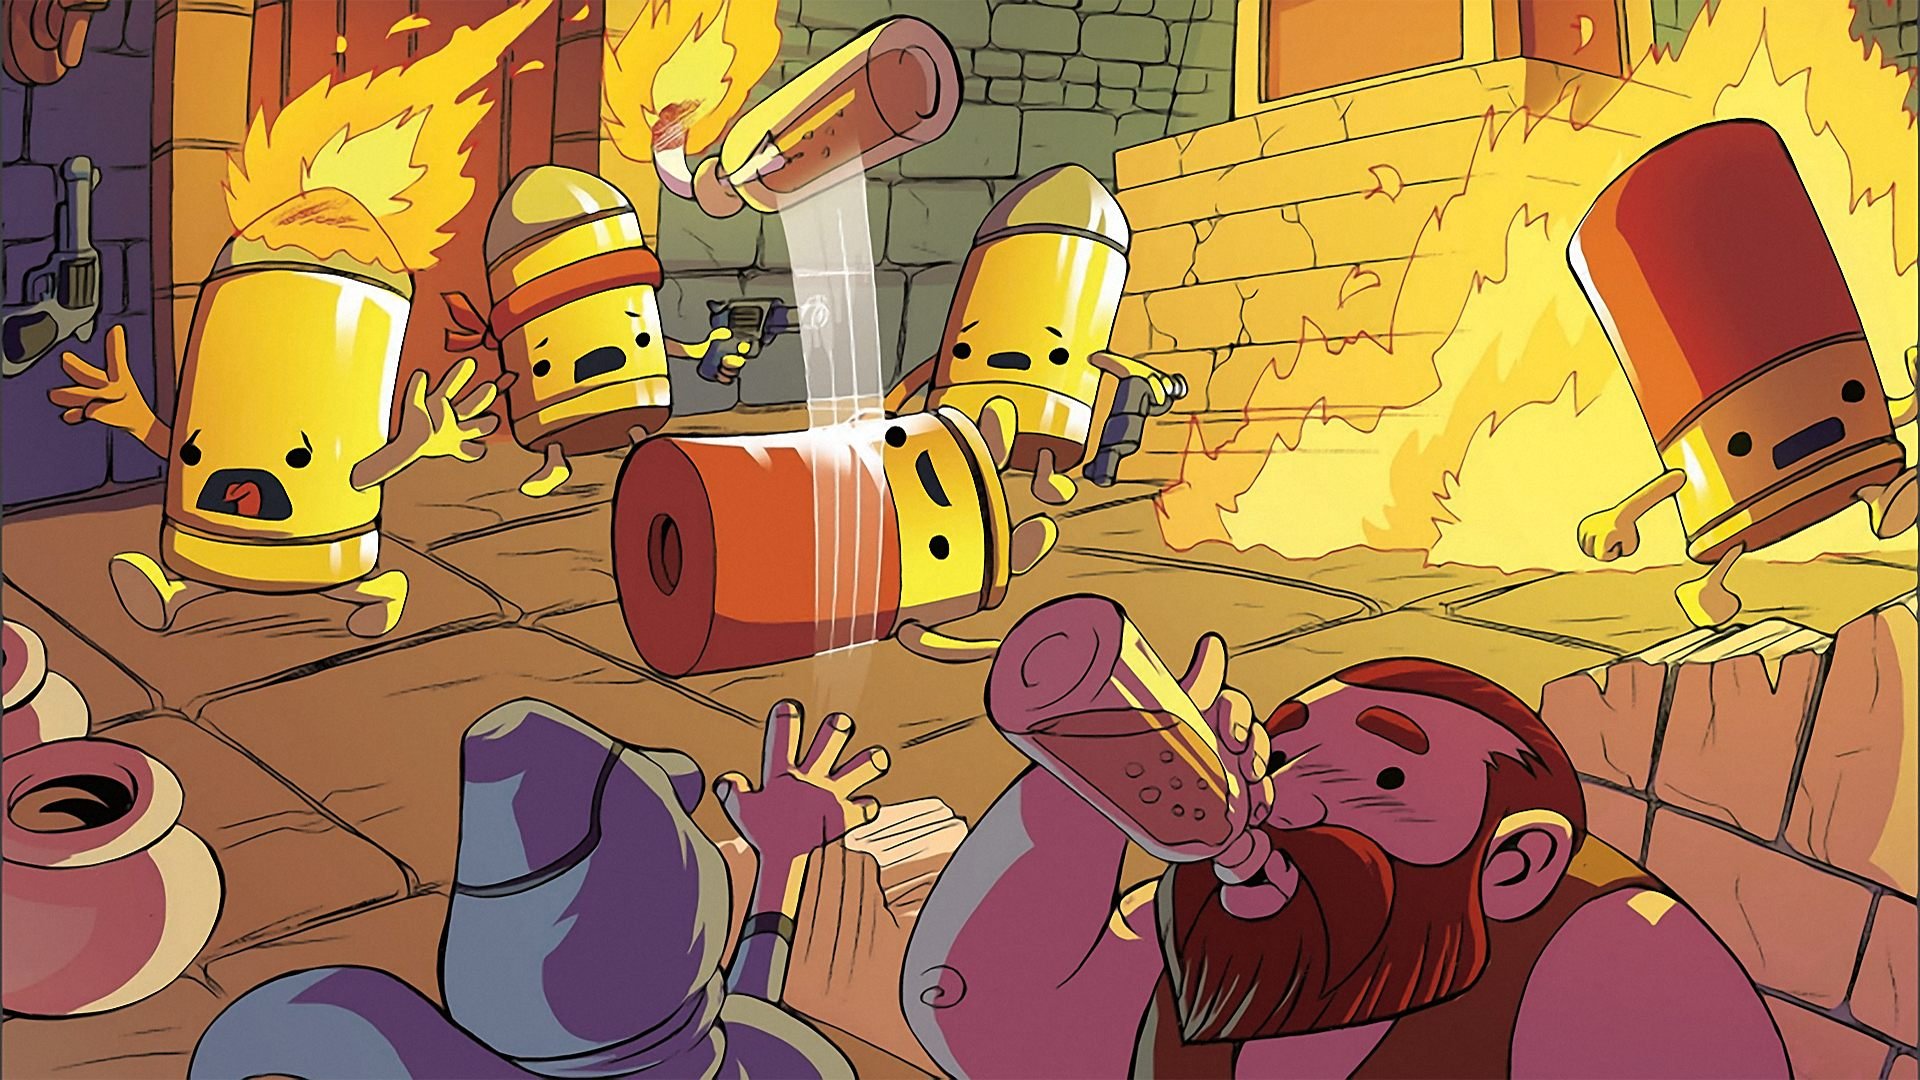 Enter the well. Enter the Dungeon. Игра enter the Gungeon. Enter the Dungeon 2. Enter the Gungeon Art.